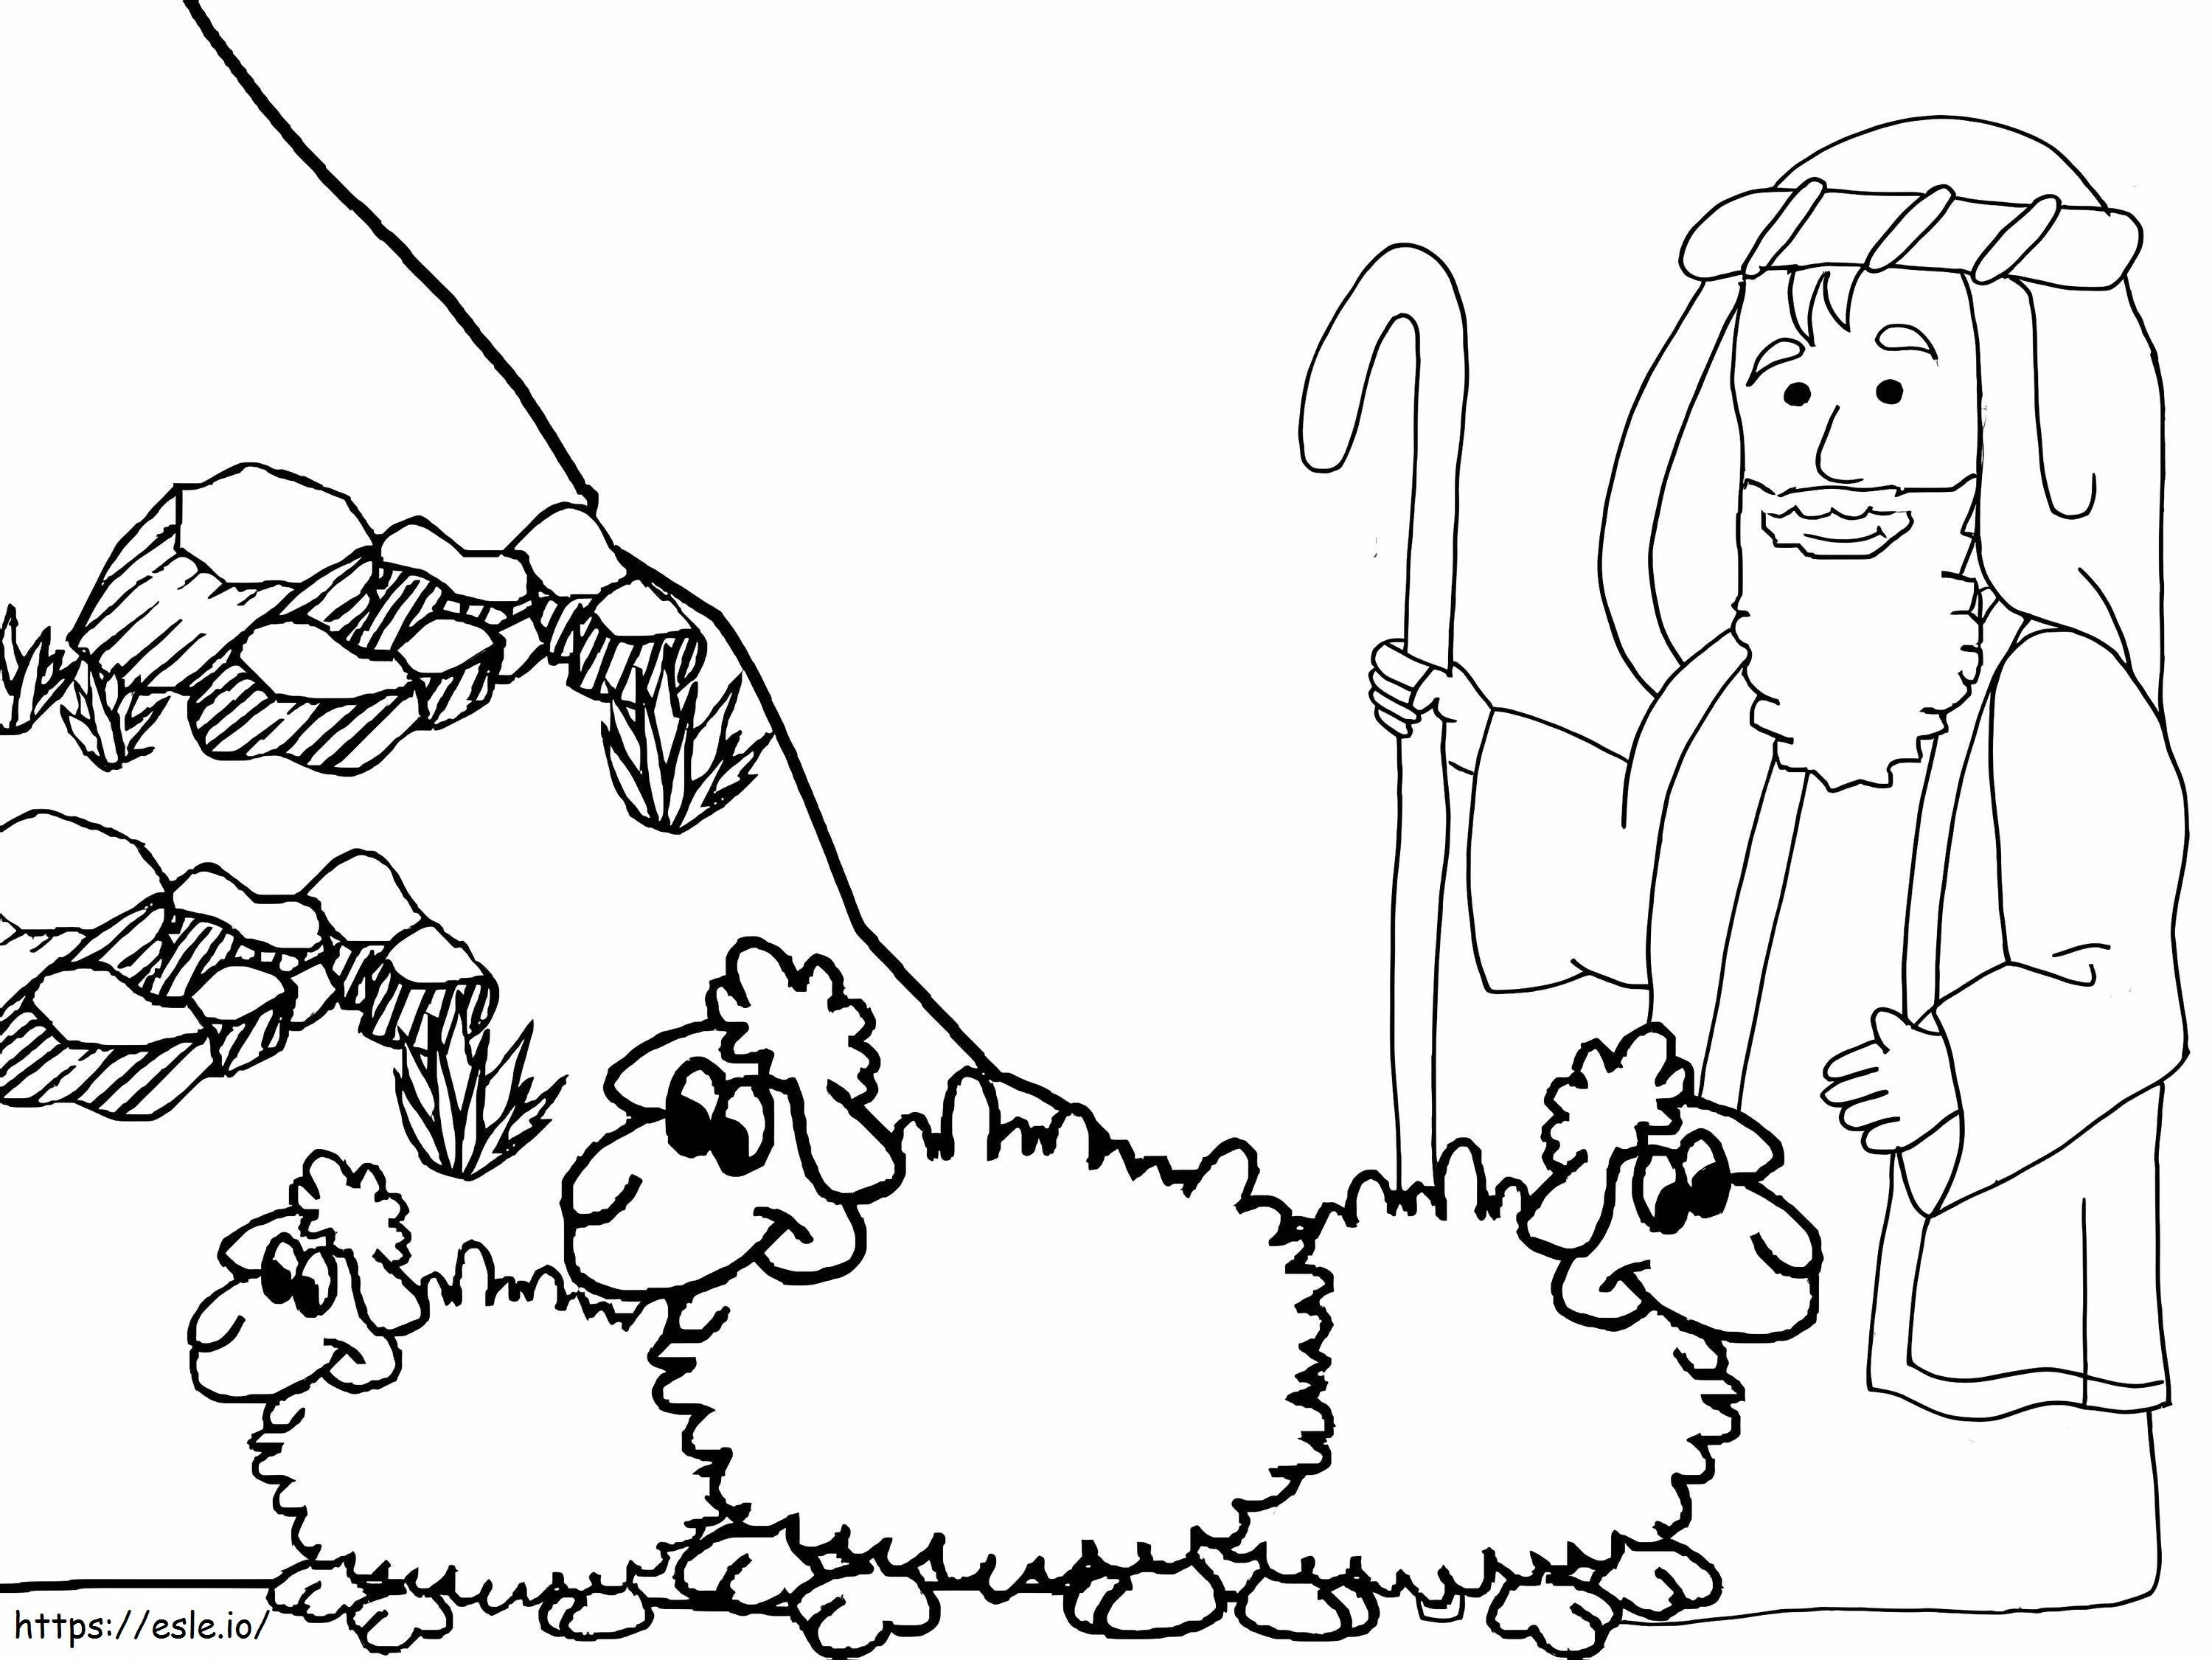 Moses The Shepherd coloring page